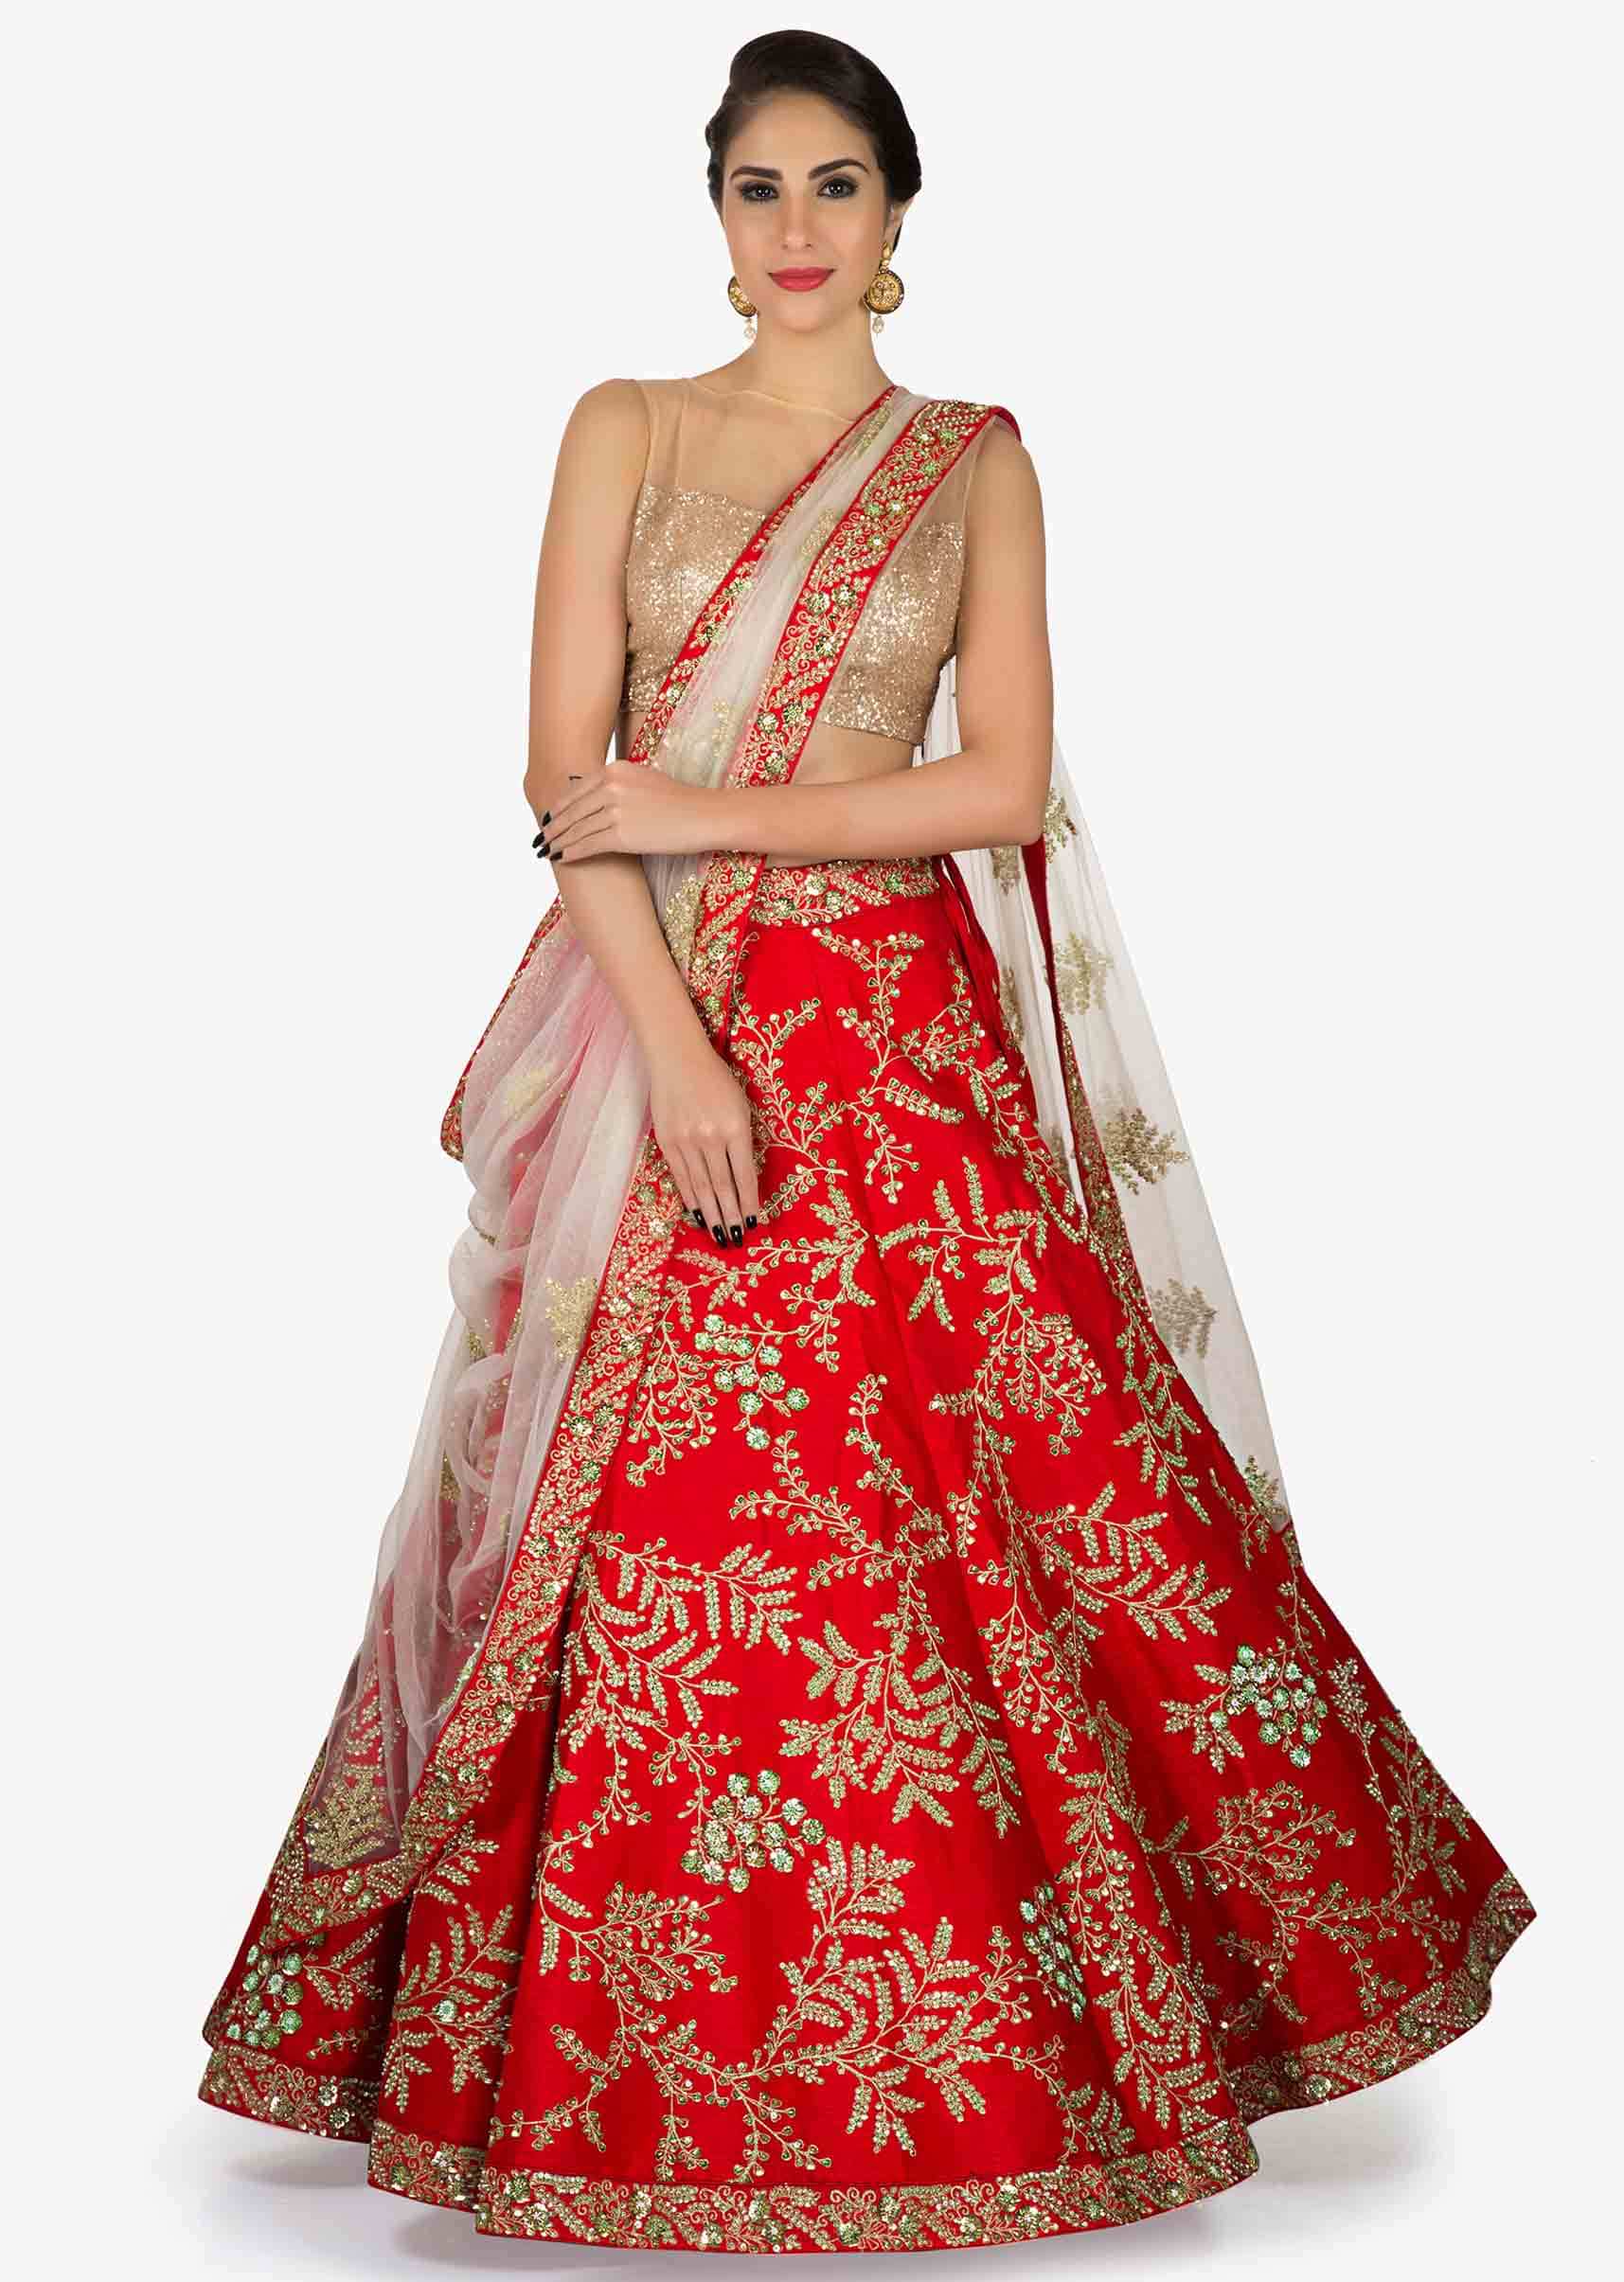 Red Silk Lehenga teamed up with Off White Net dupatta with Kundan and Zari Embellishments Only on Kalki